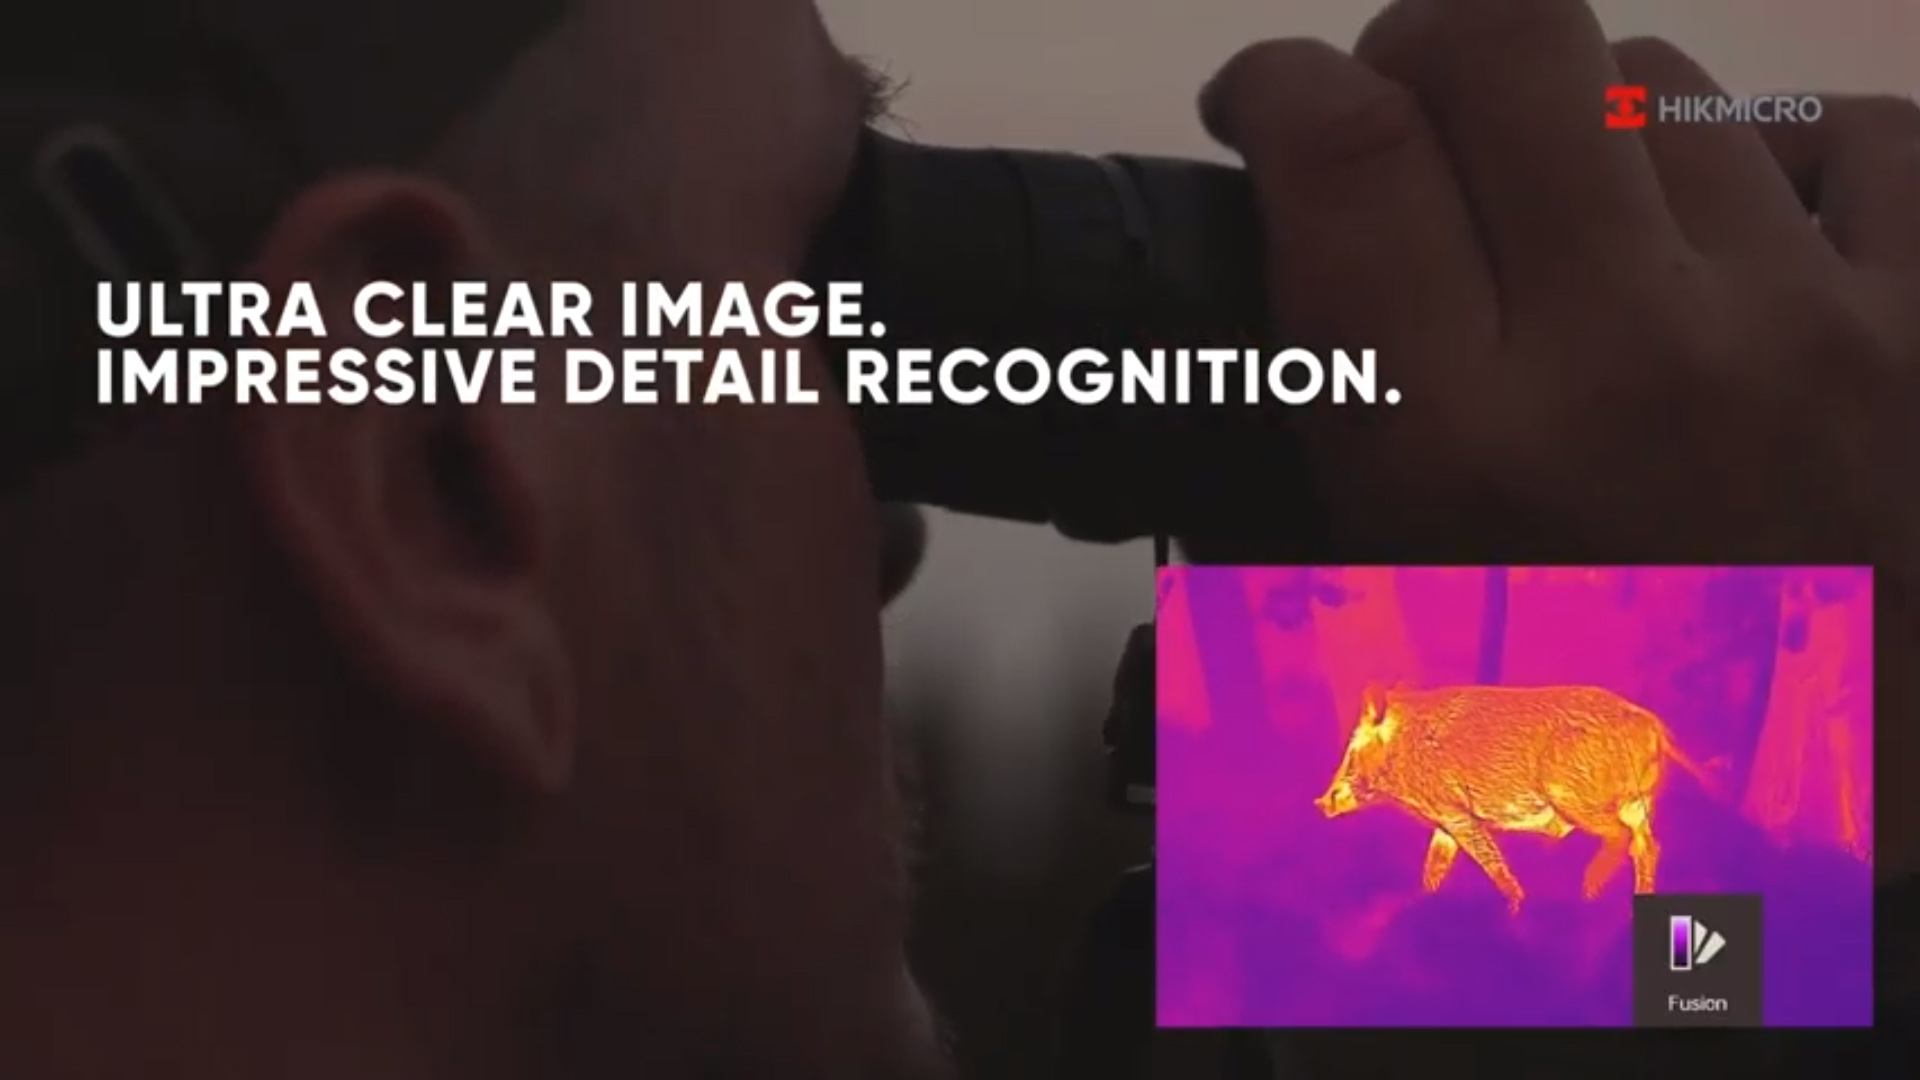 The image shows an animal in thermal vision mode and highlights the level of detail delivered by the monocular.